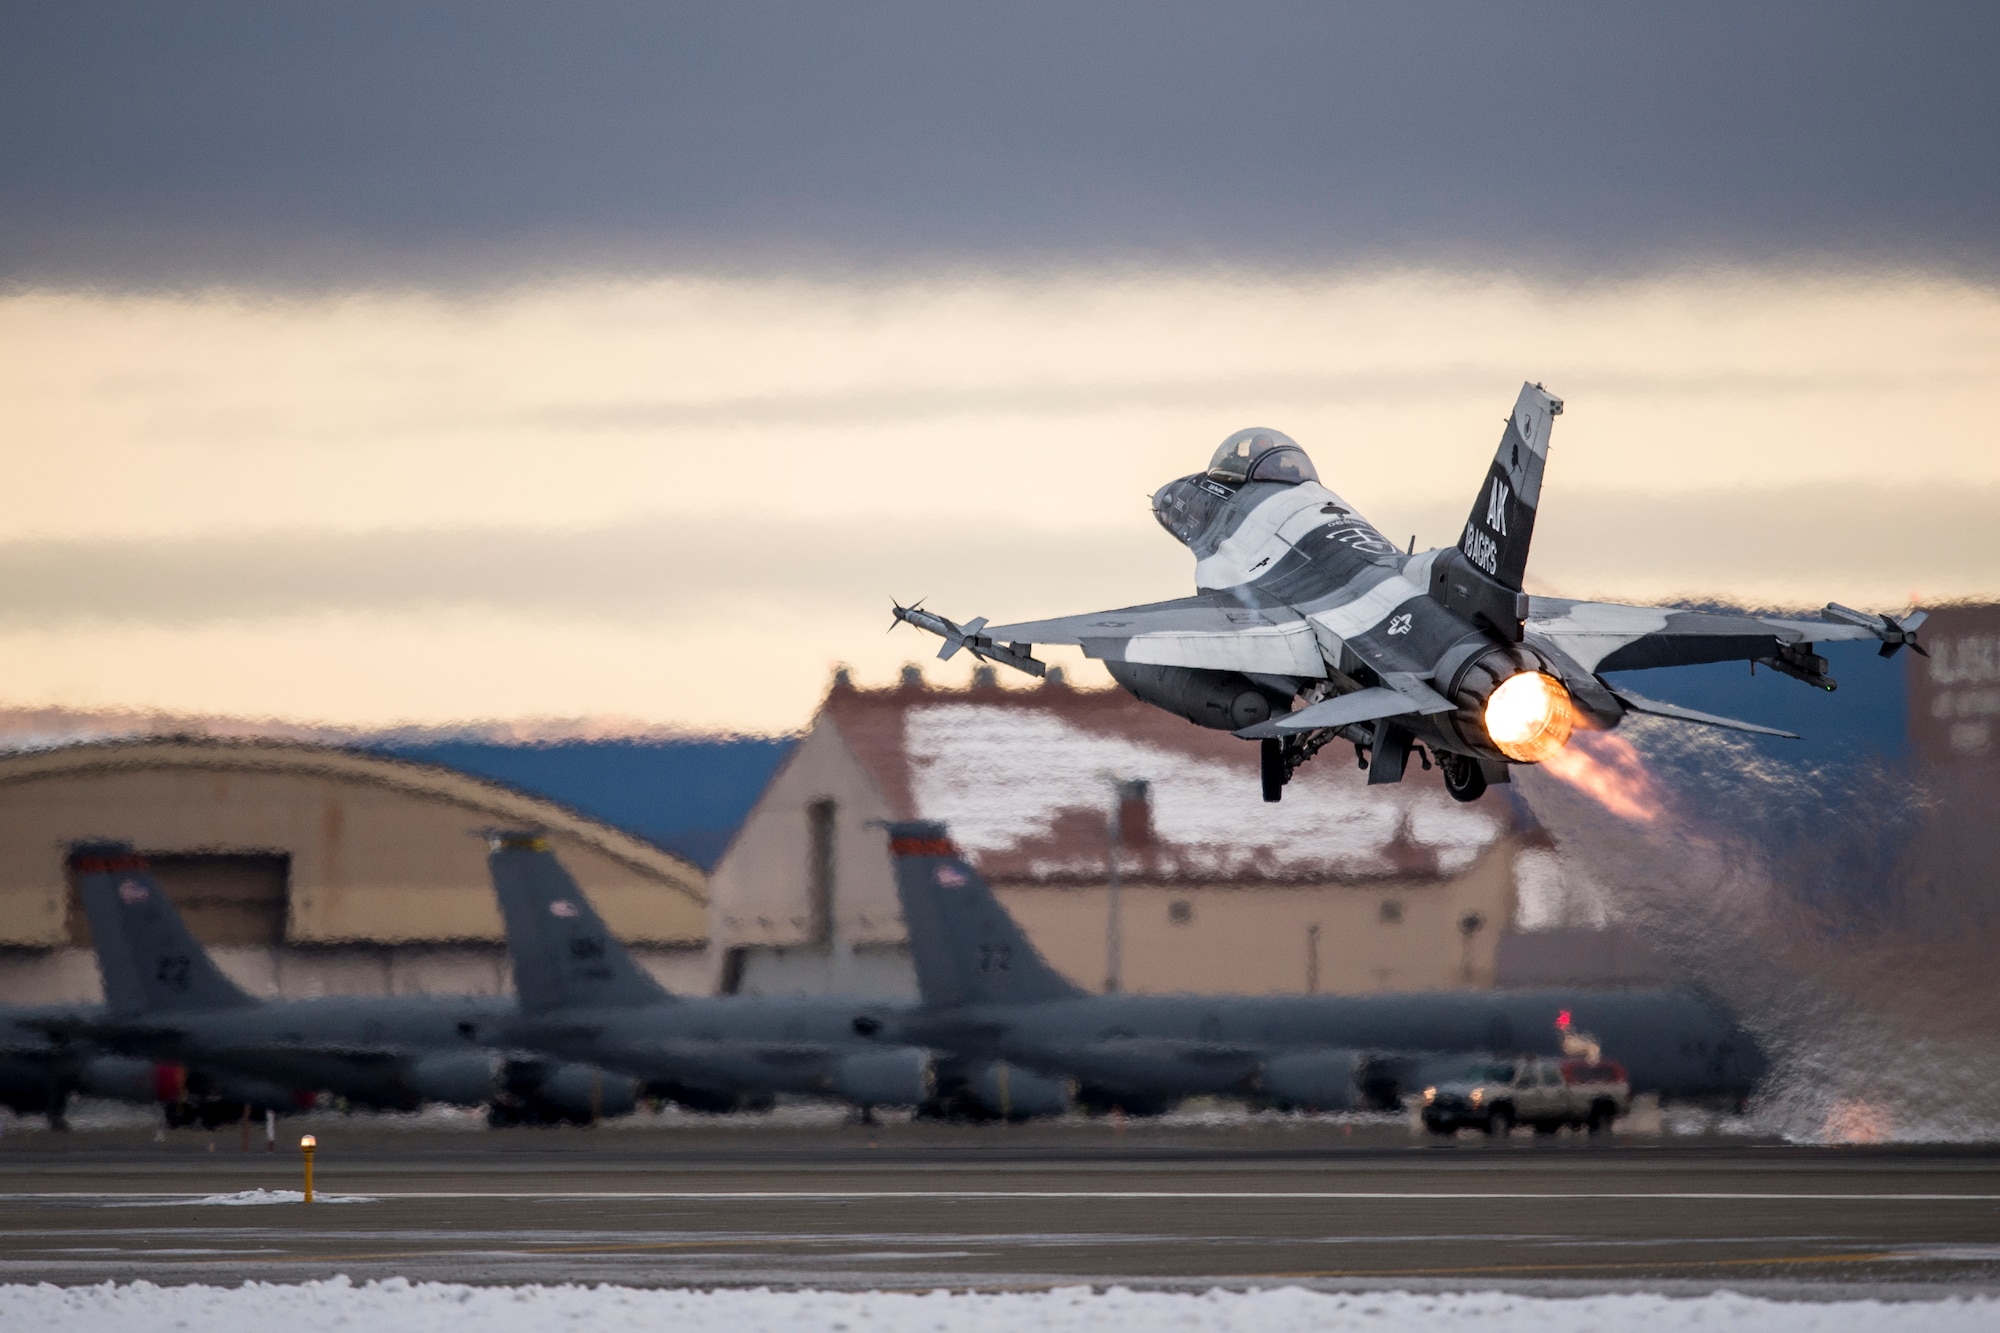 An F-16 Fighting Falcon takes off Oct. 15, 2014, at Eielson Air Force Base, Alaska, during Red Flag-Alaska 15-1. The Pacific Air Forces commander-directed field training exercises for U.S. and partner nation forces provide combined offensive counter-air, interdiction, close air support and large force employment training in a simulated combat environment. The F-16 is assigned to the 18th Aggressor Squadron at Eielson AFB. (U.S. Air Force photo/Senior Airman Peter Reft)